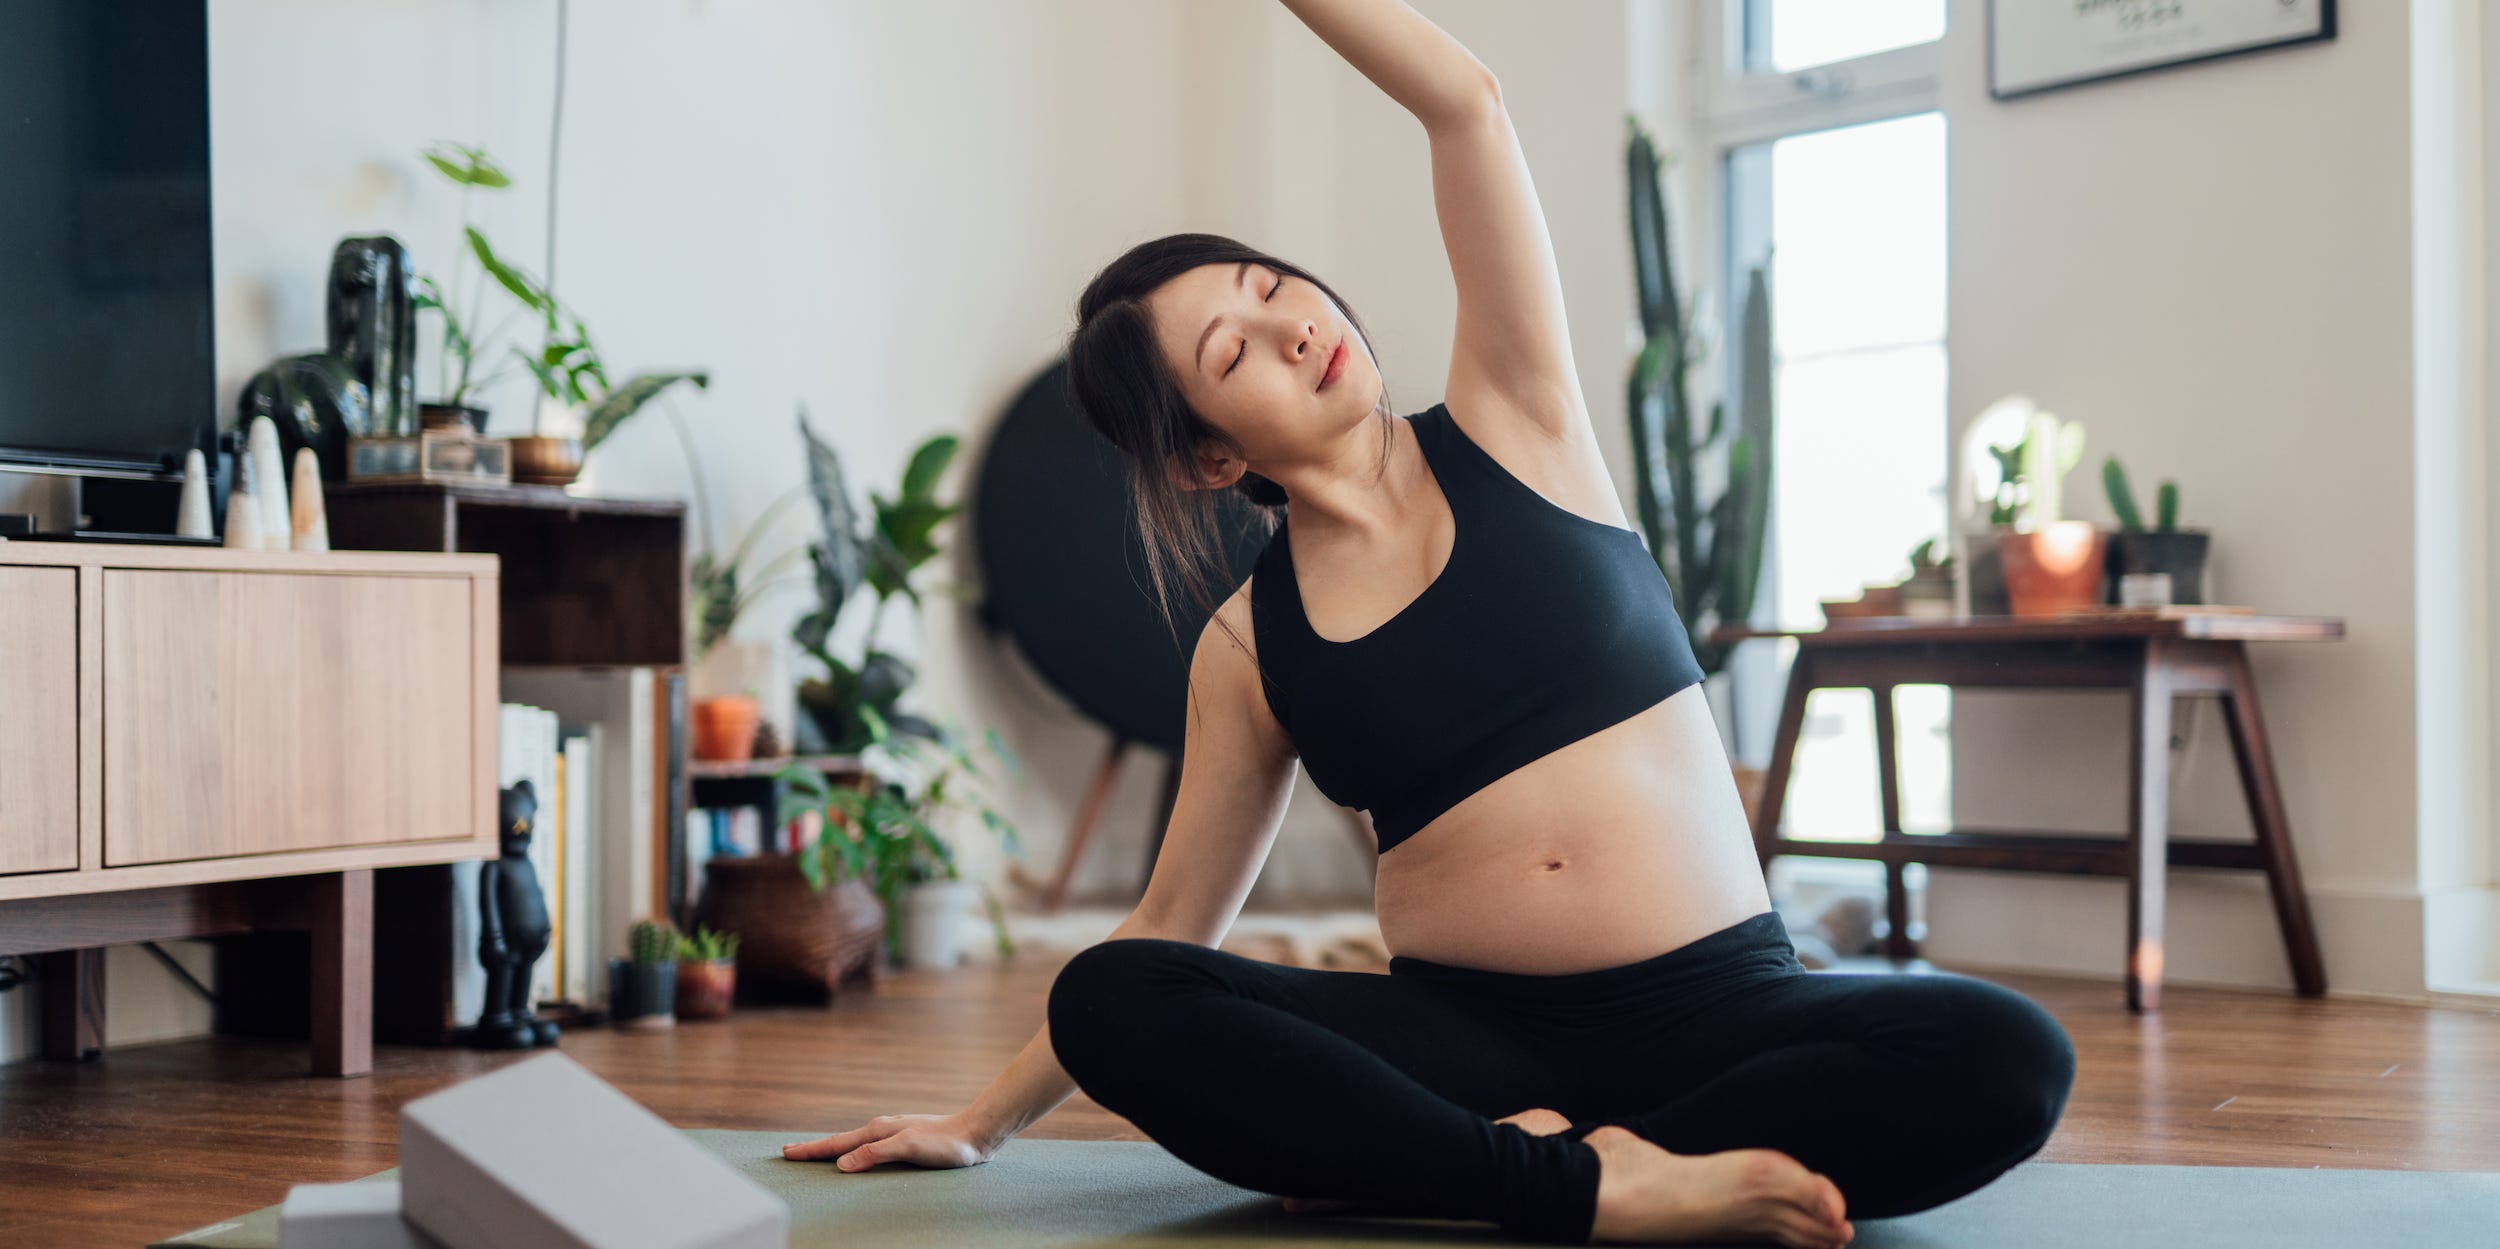 A pregnant woman does yoga on a mat at home.